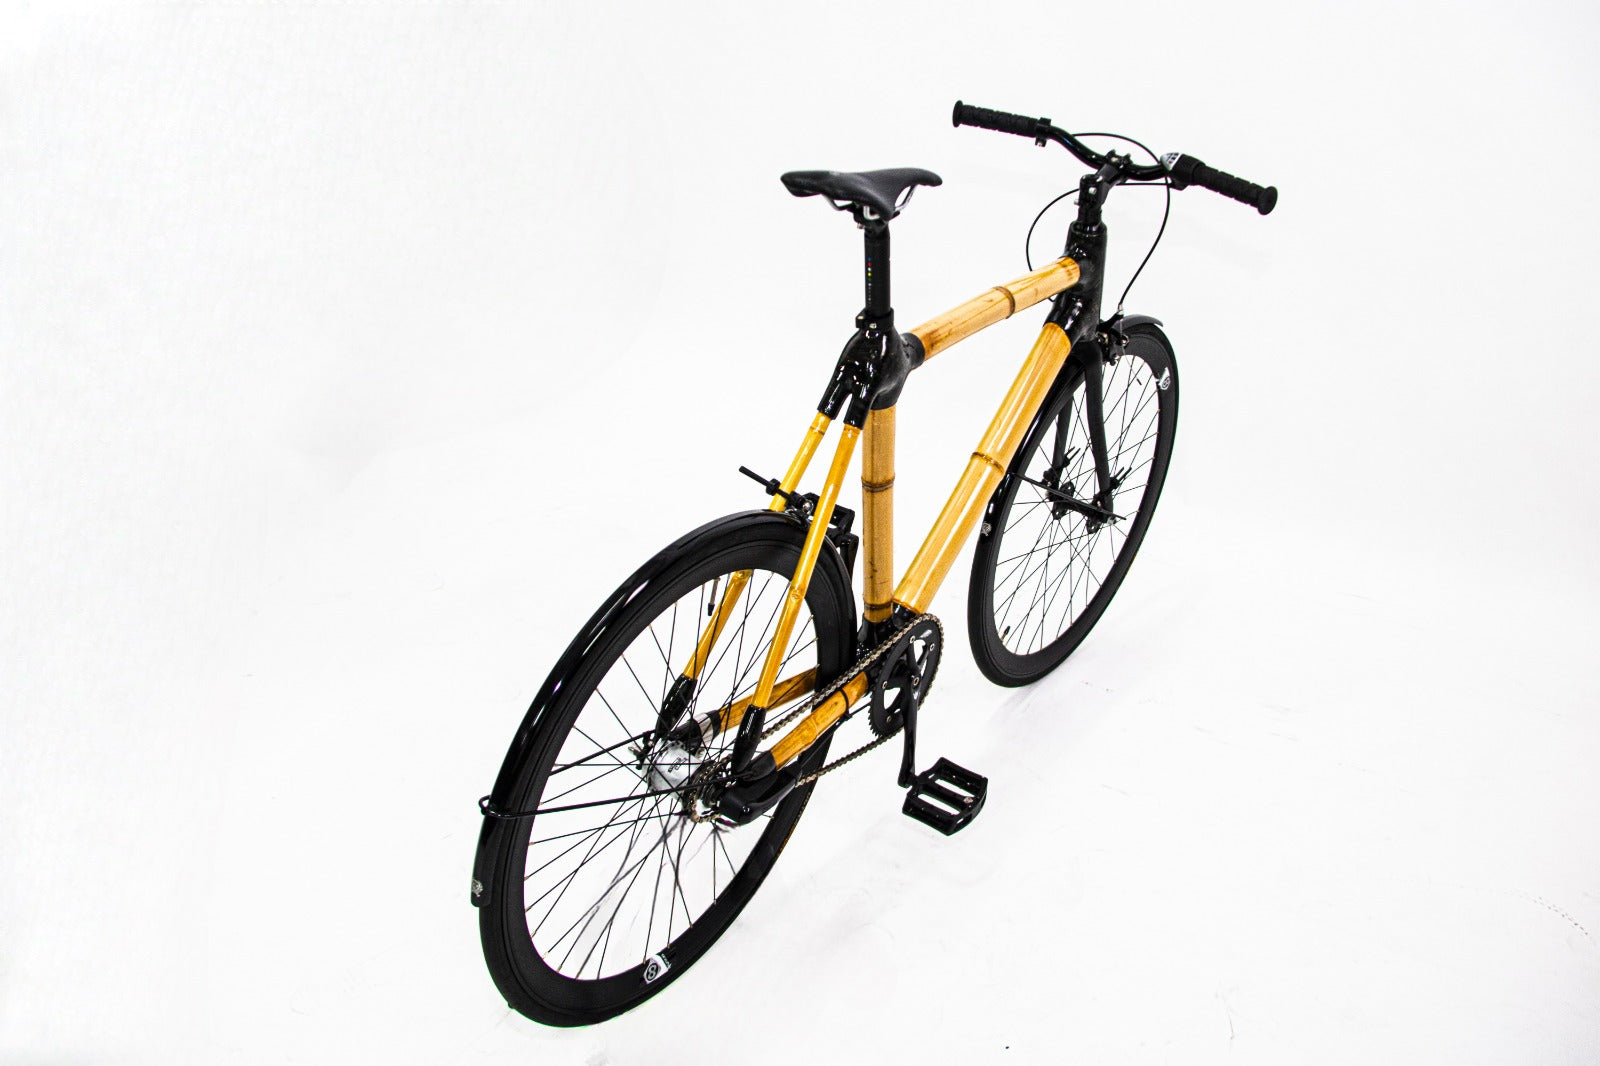 Model bicycle 3-speed "Multiscatto" 